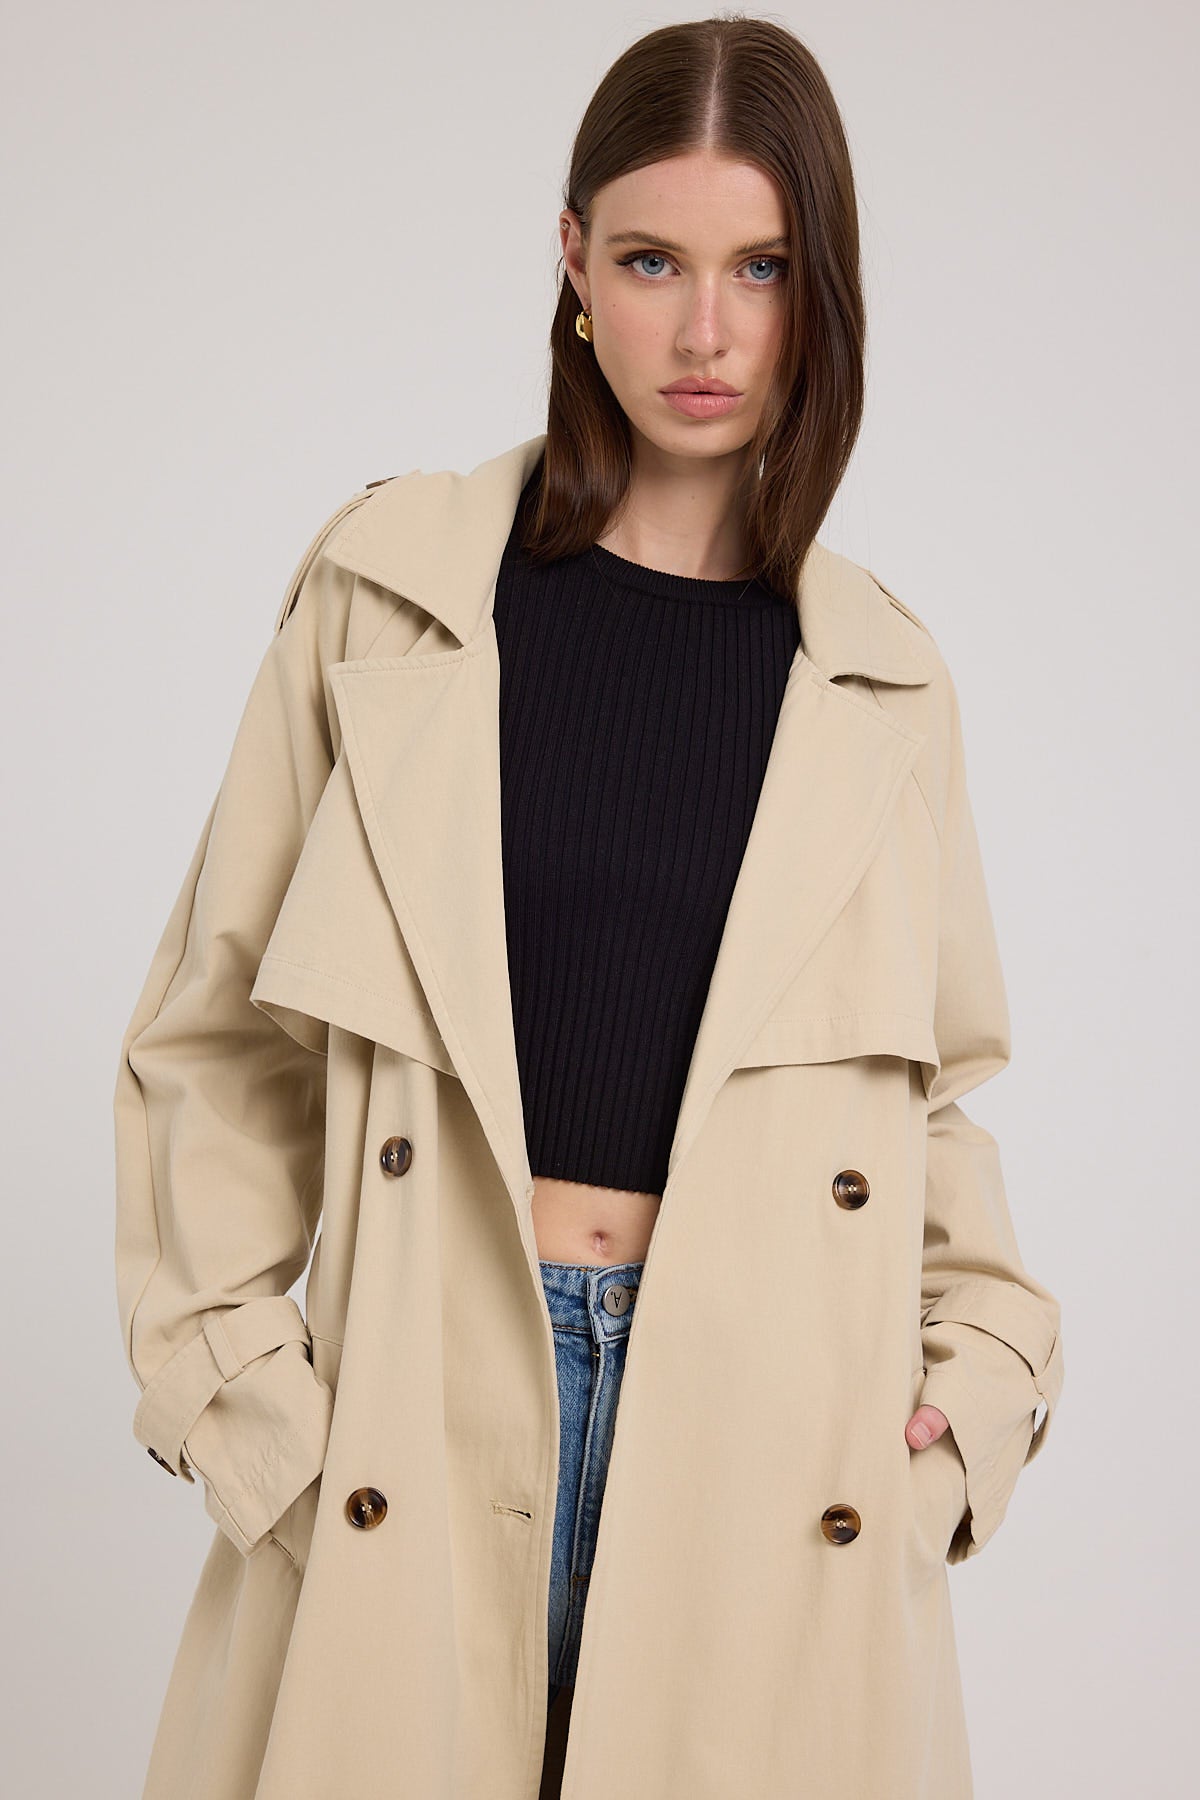 All About Eve Eve Trench Coat Tan